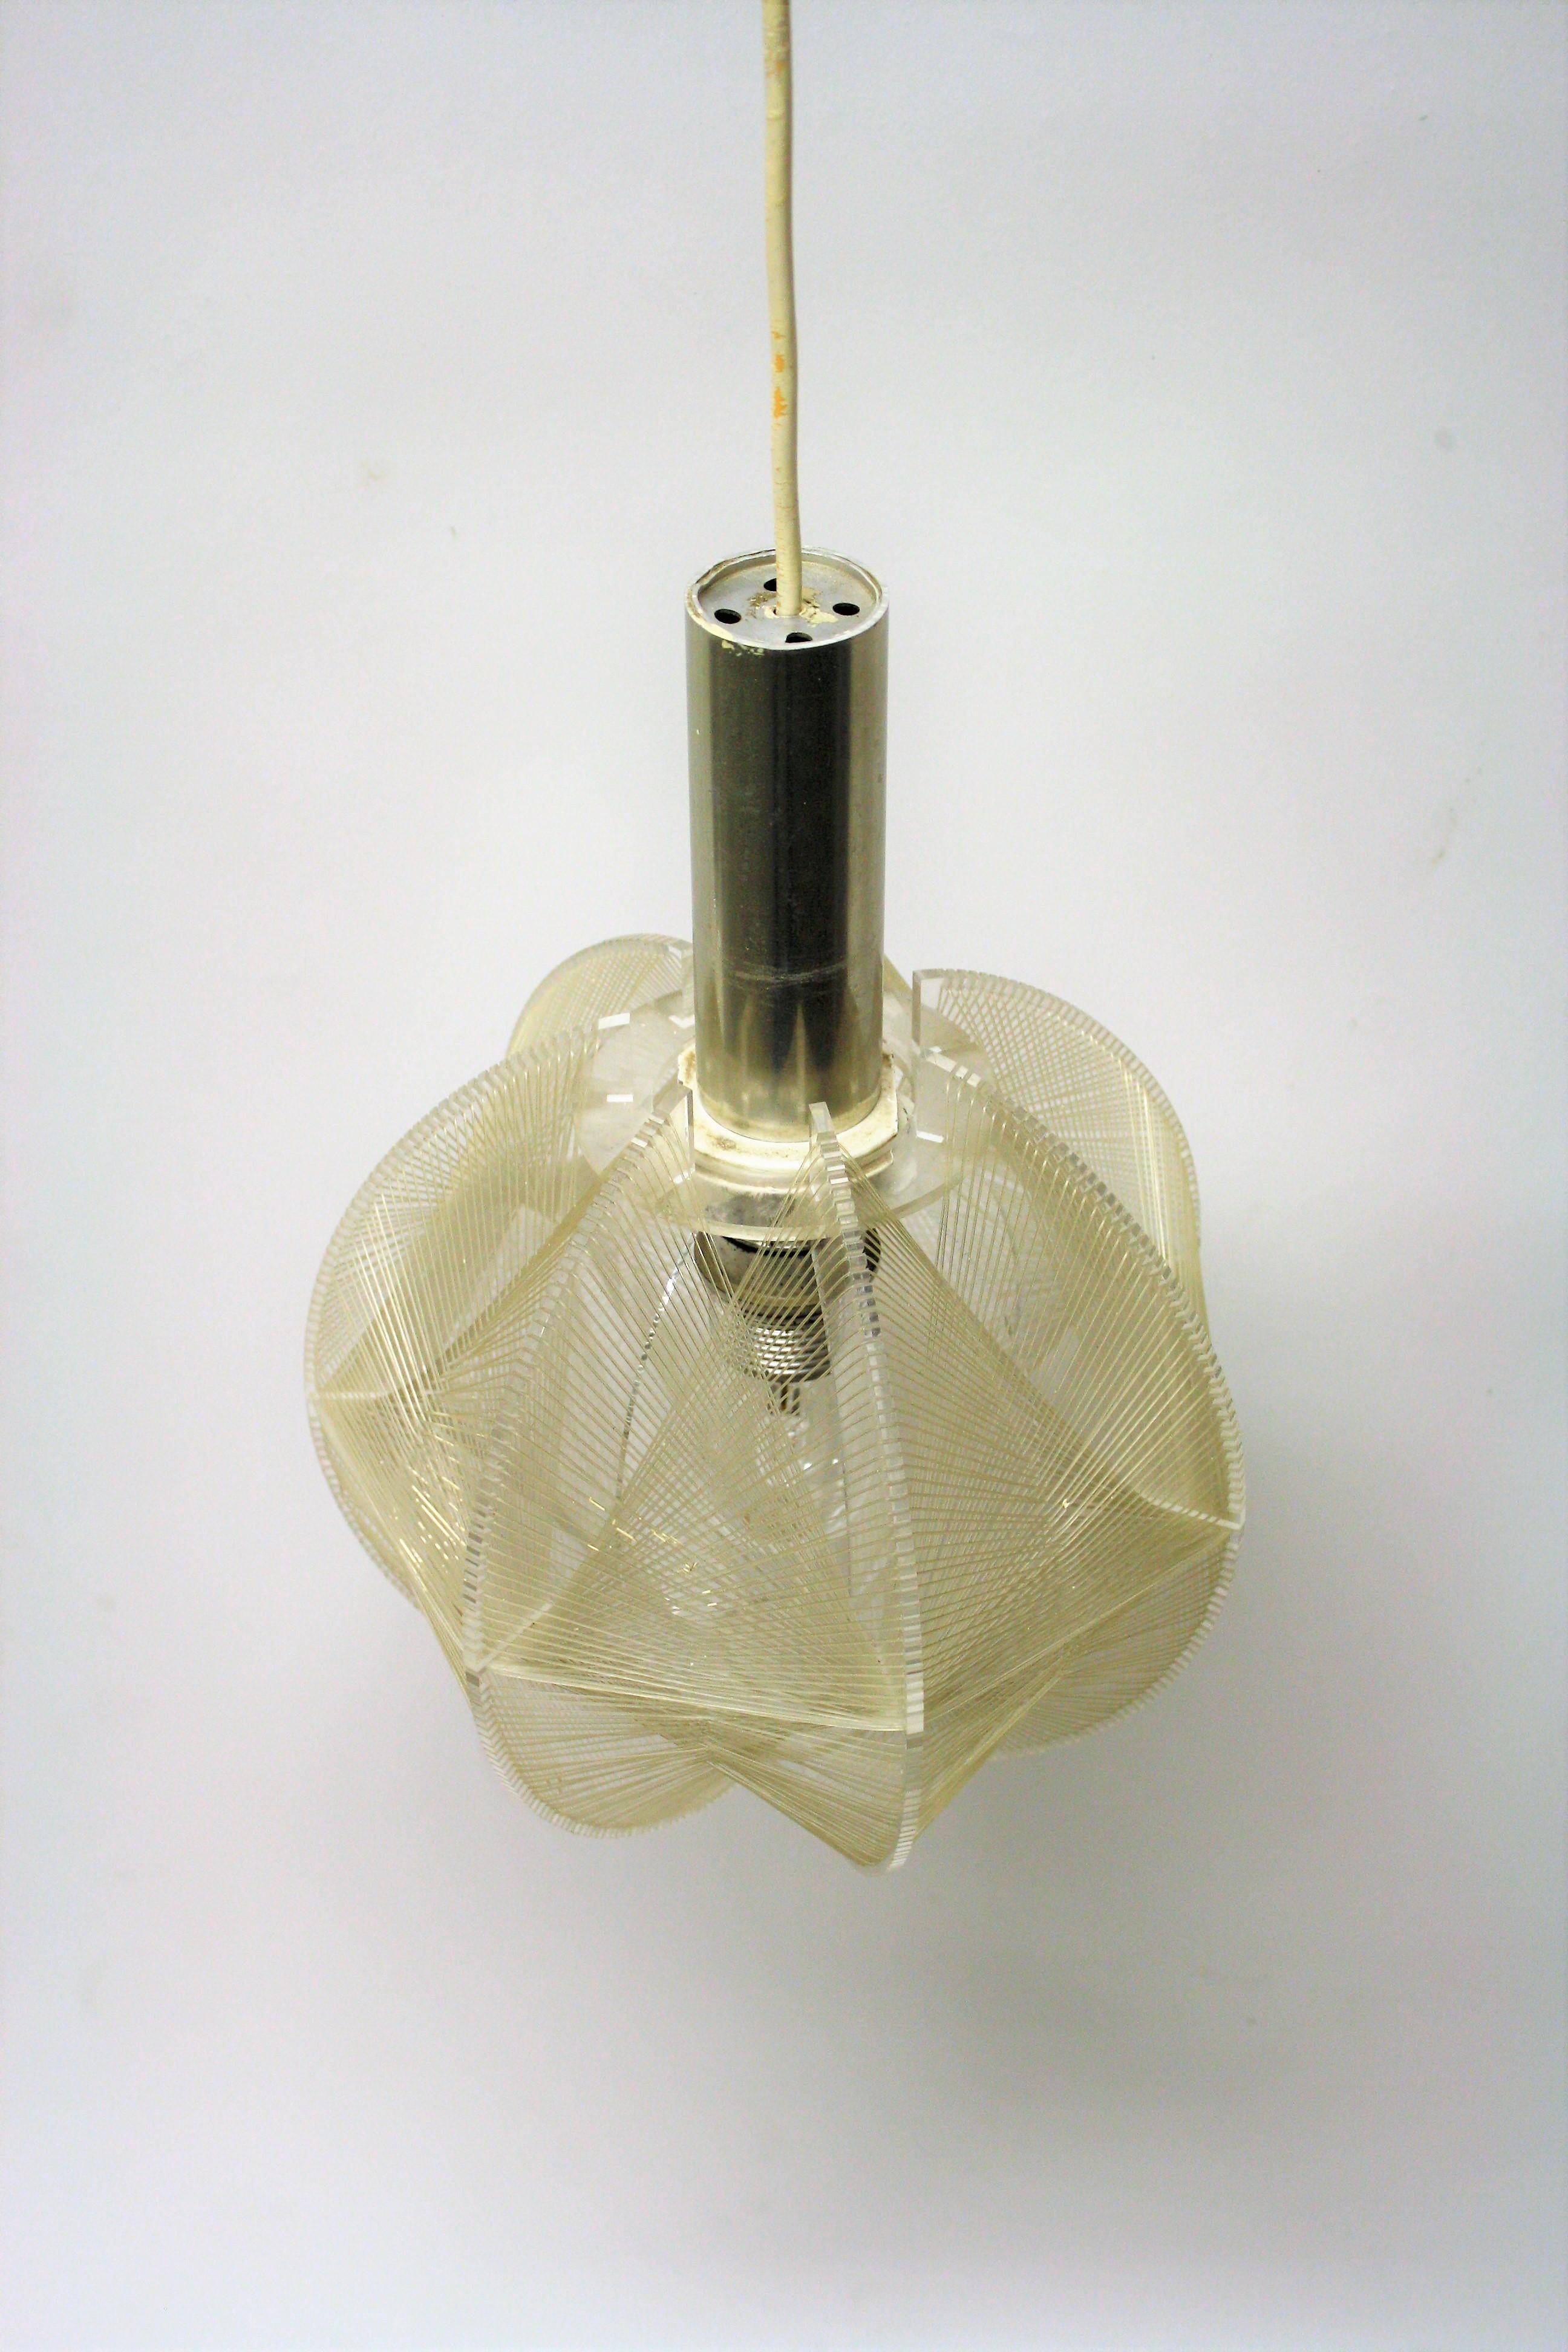 German Vintage Pendant Light by Paul Secon for Sompex, 1960s